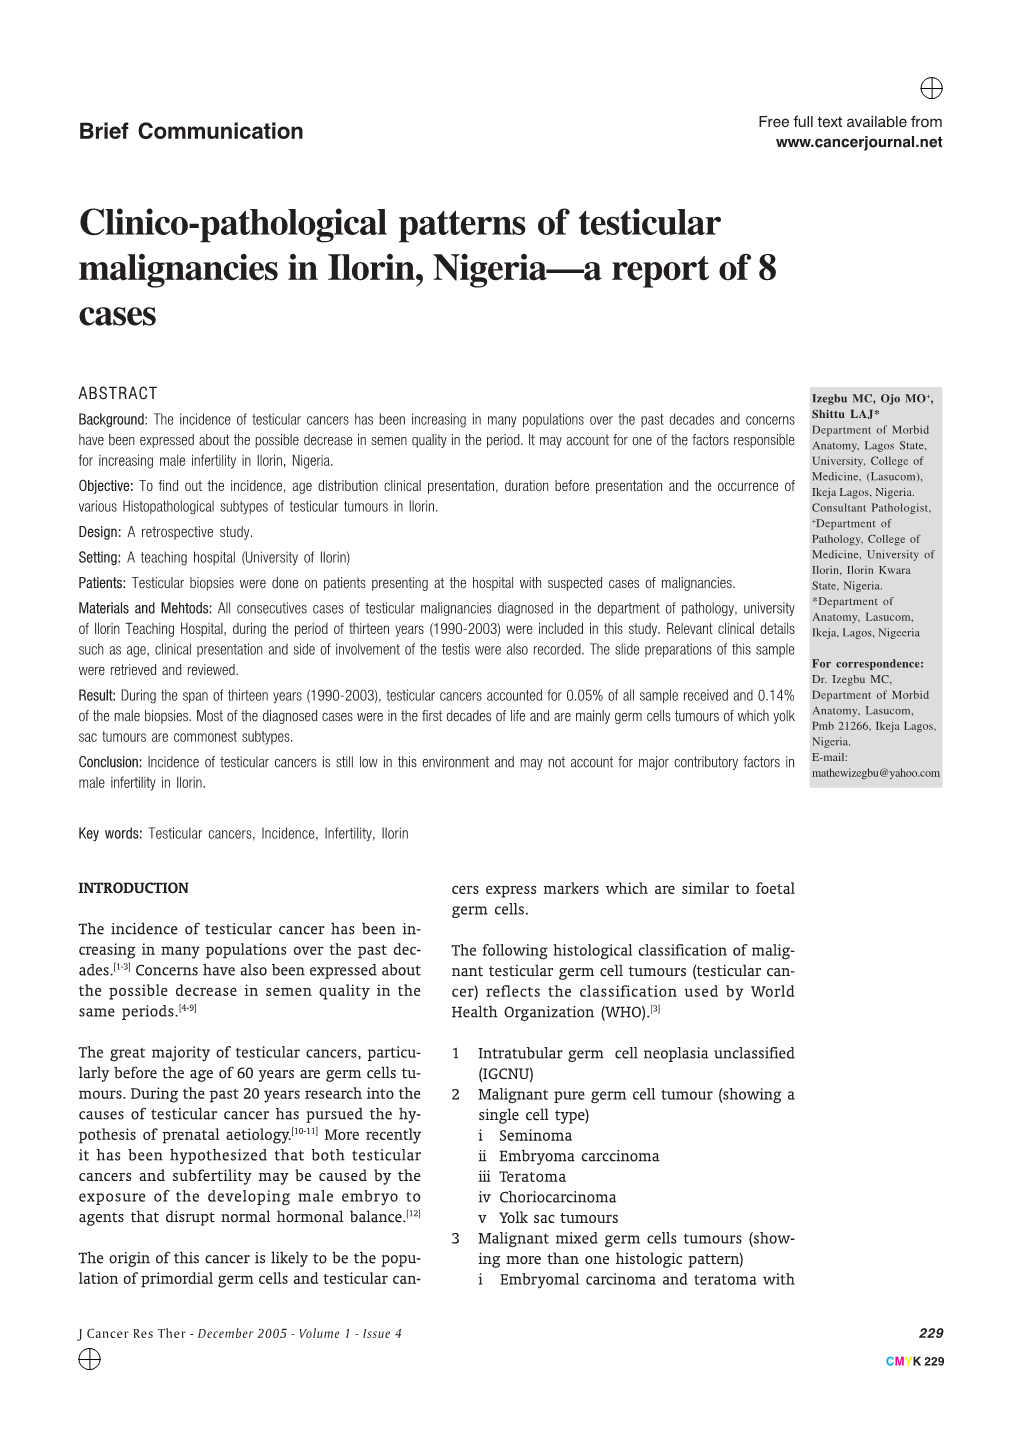 Clinico-Pathological Patterns of Testicular Malignancies in Ilorin, Nigeria—A Report of 8 Cases